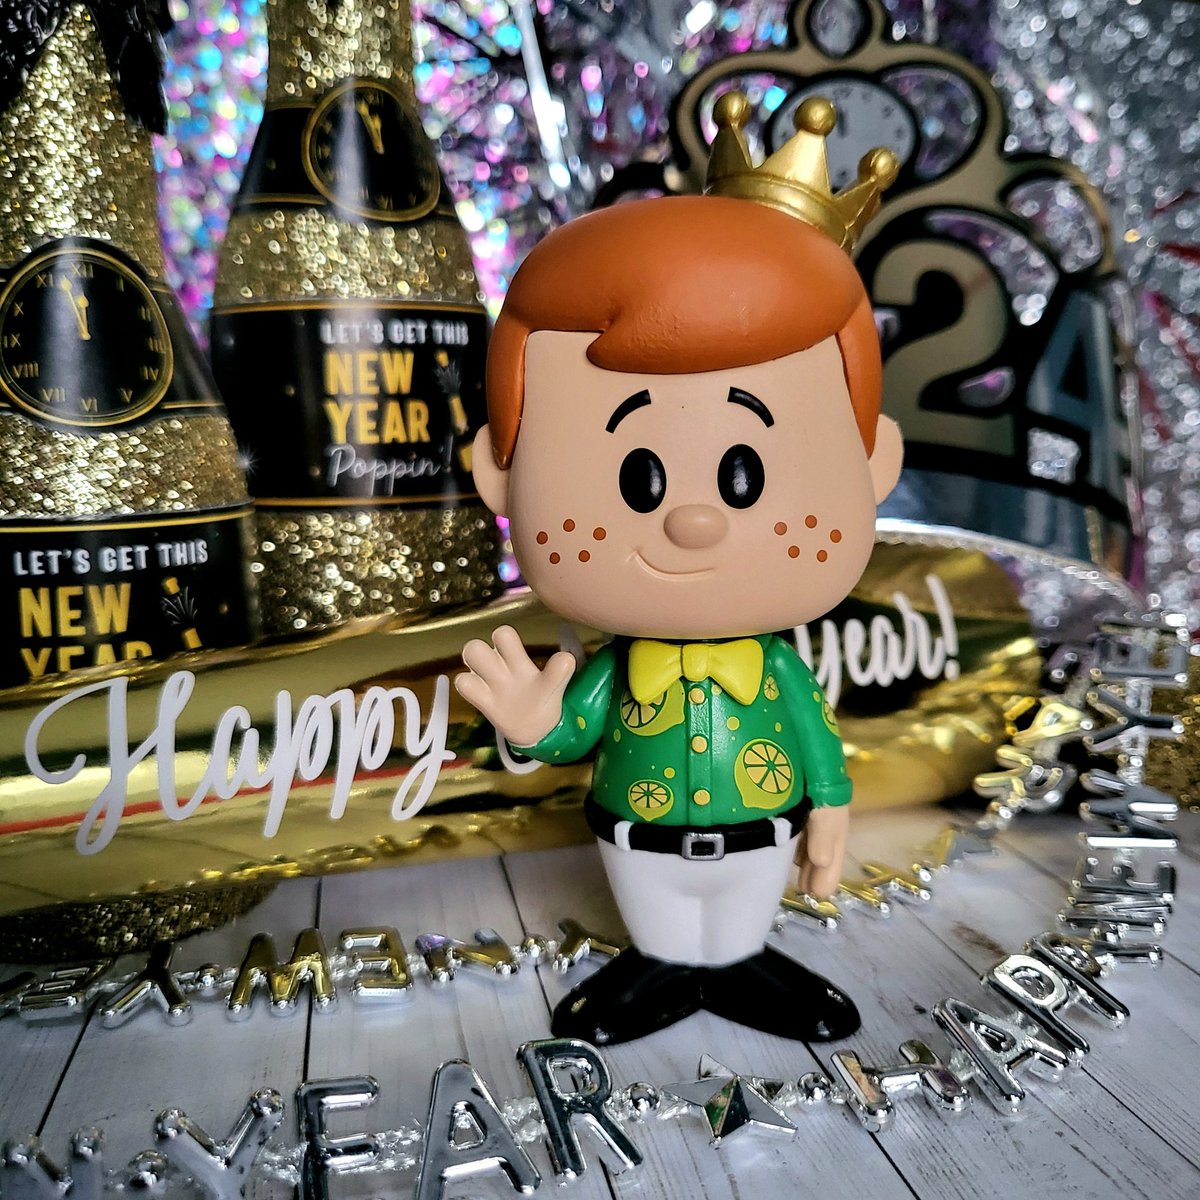 Wishing everyone a safe and Happy New Year's!! Here's to more Freddy in 2024 @OriginalFunko #FunkoPhotoADayChallenge